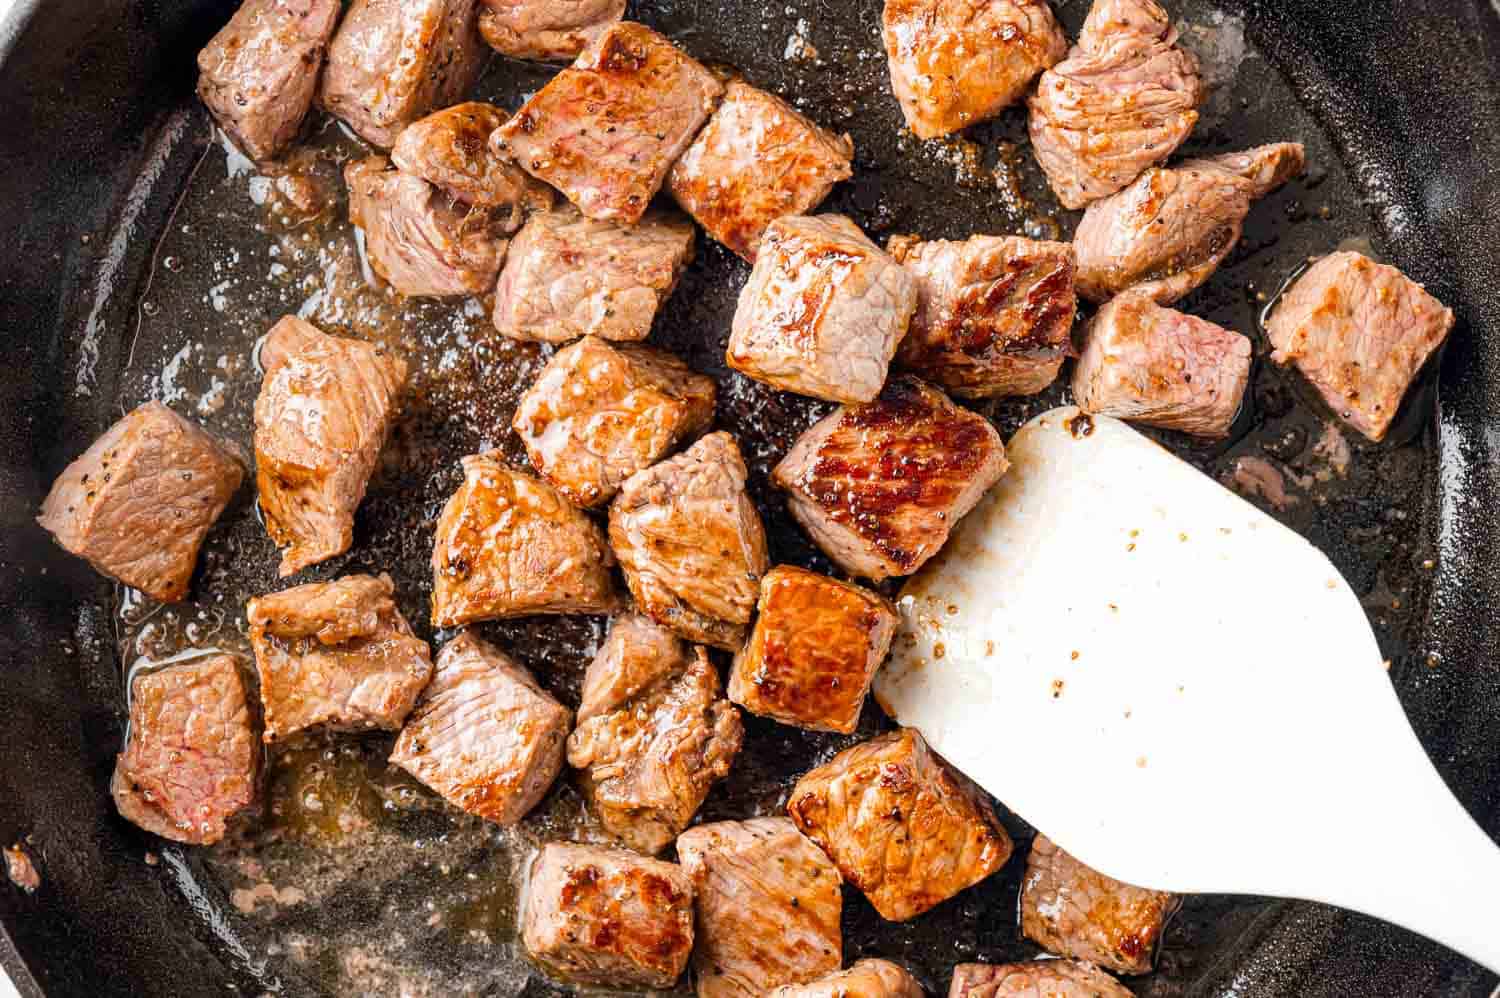 Fully cooked steak bites in a pan, being stirred with white spatula.